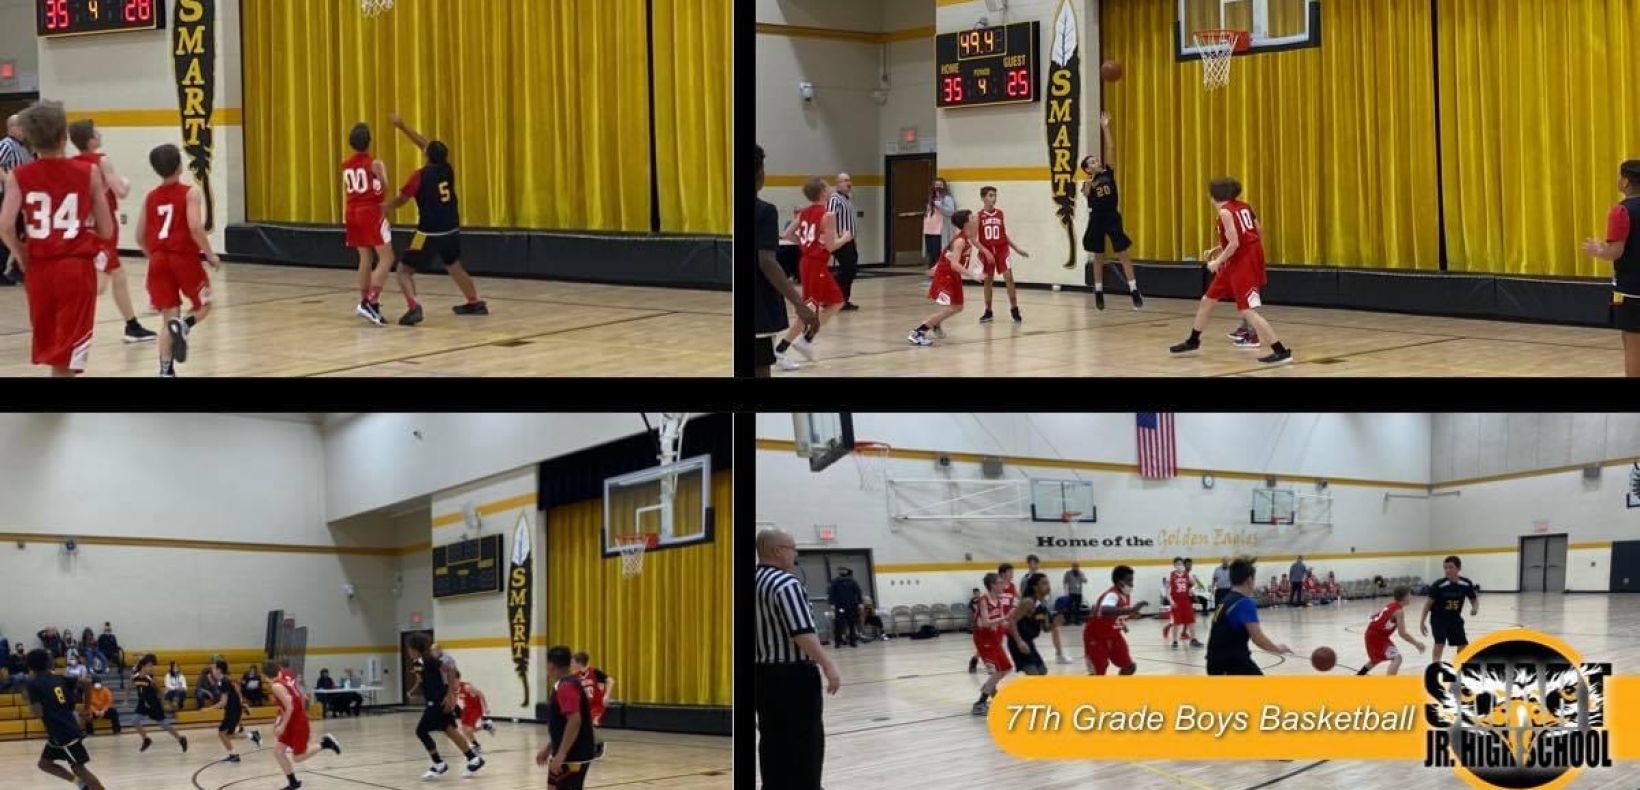 Multiple images showing a basketball game.